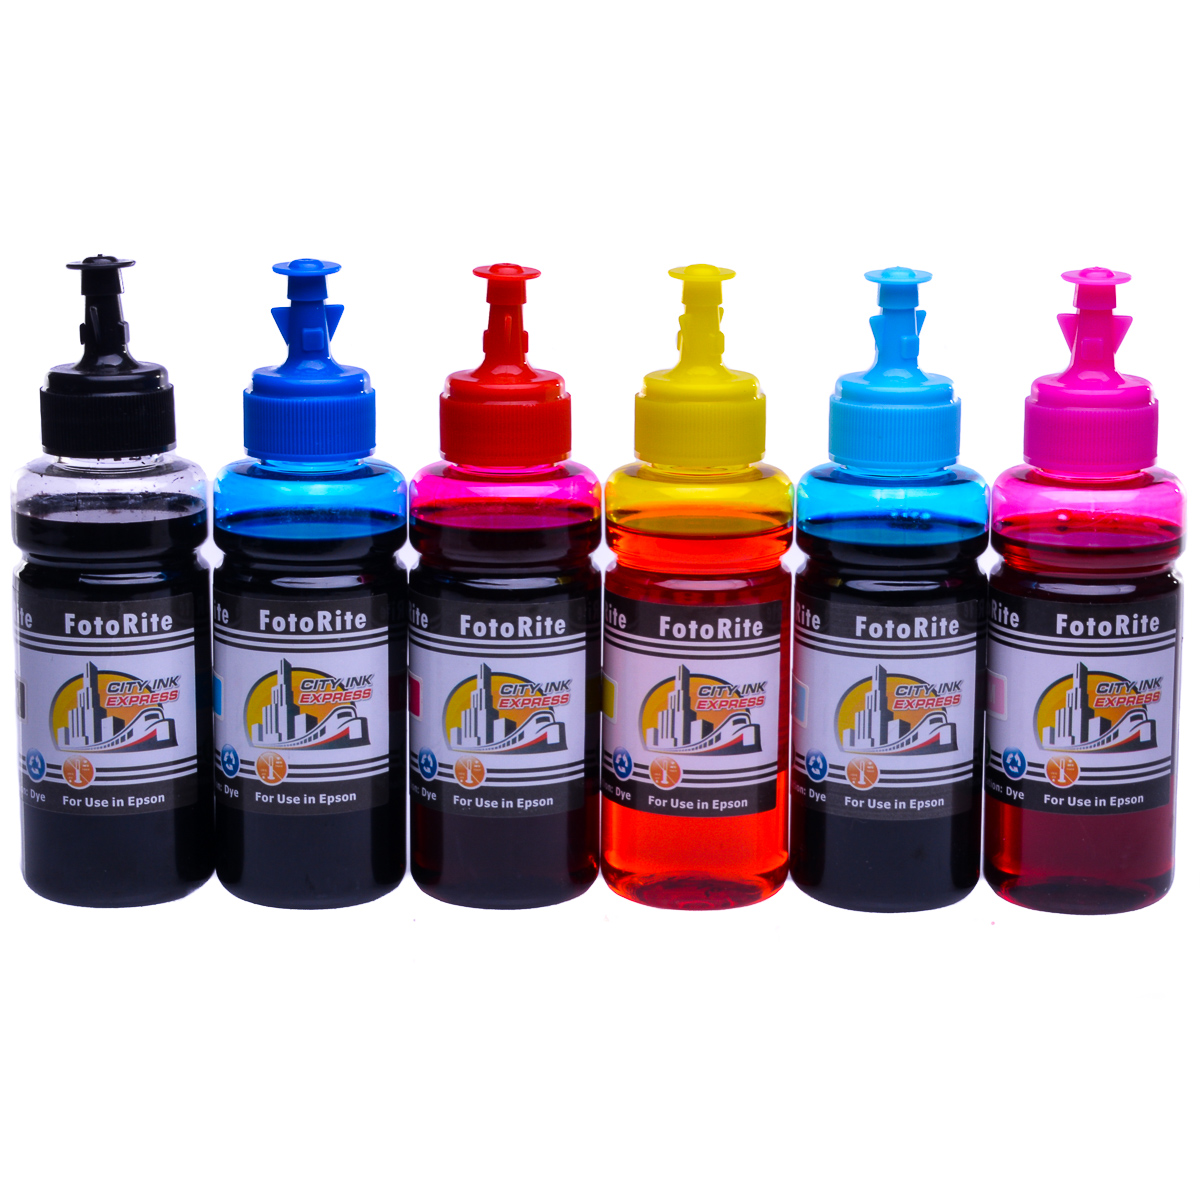 Cheap Multipack dye ink refill replaces Epson Stylus RX600